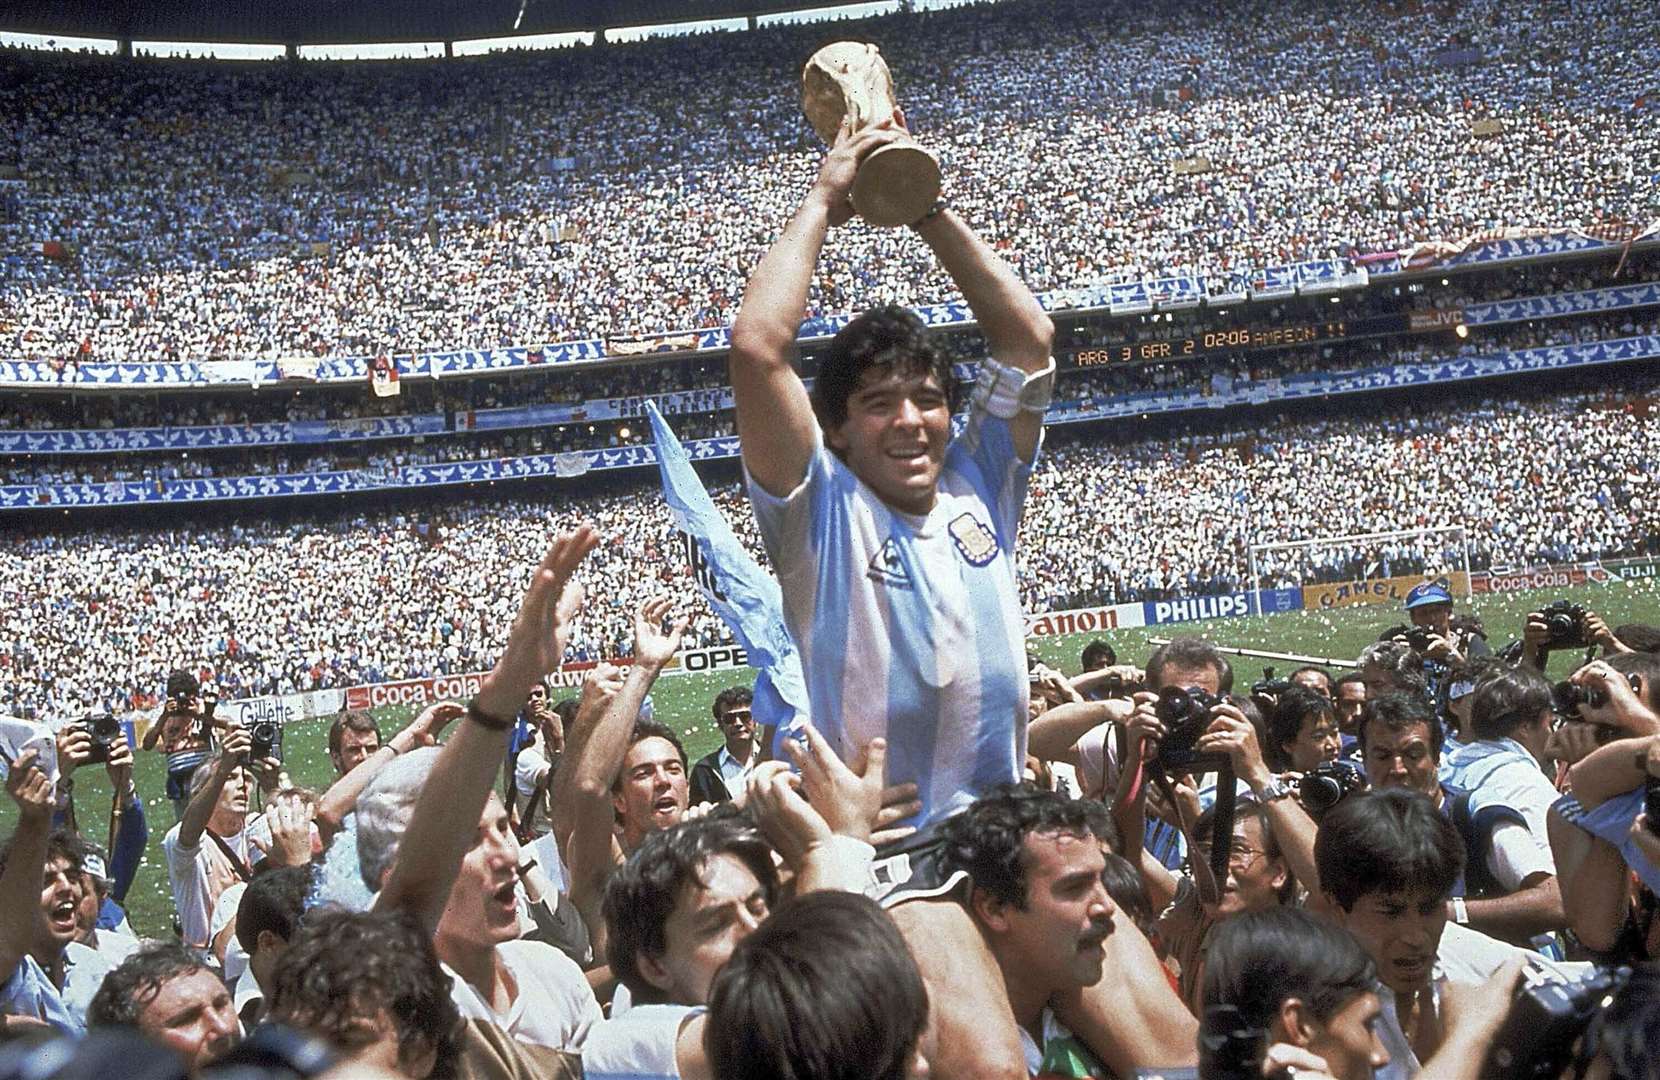 Diego Maradona holds up the World Cup in 1986 (Carlo Fumagalli/AP)